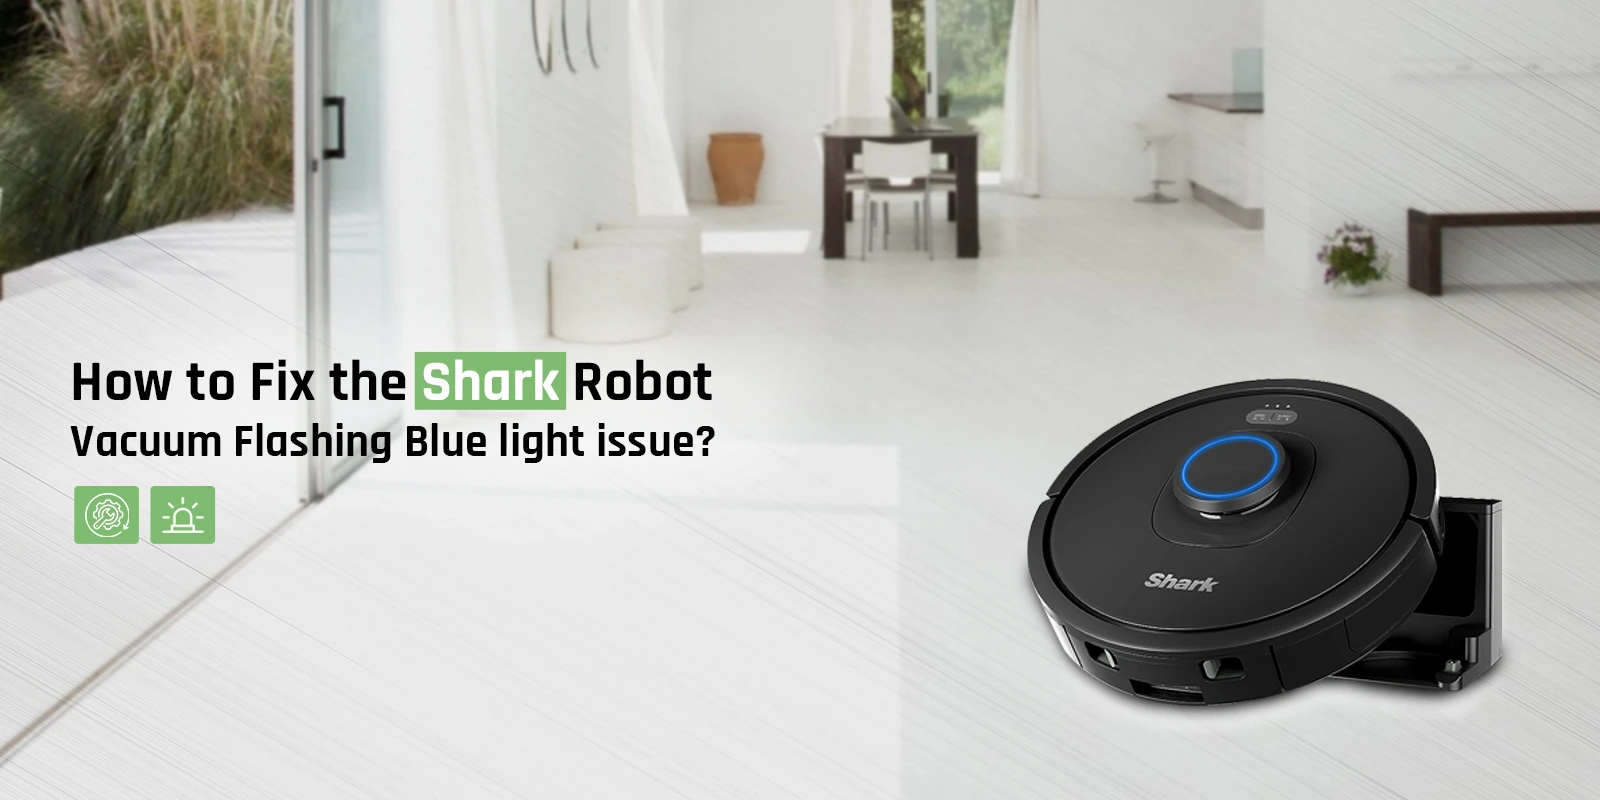 How to Fix the Shark Robot Vacuum Flashing Blue light issue?